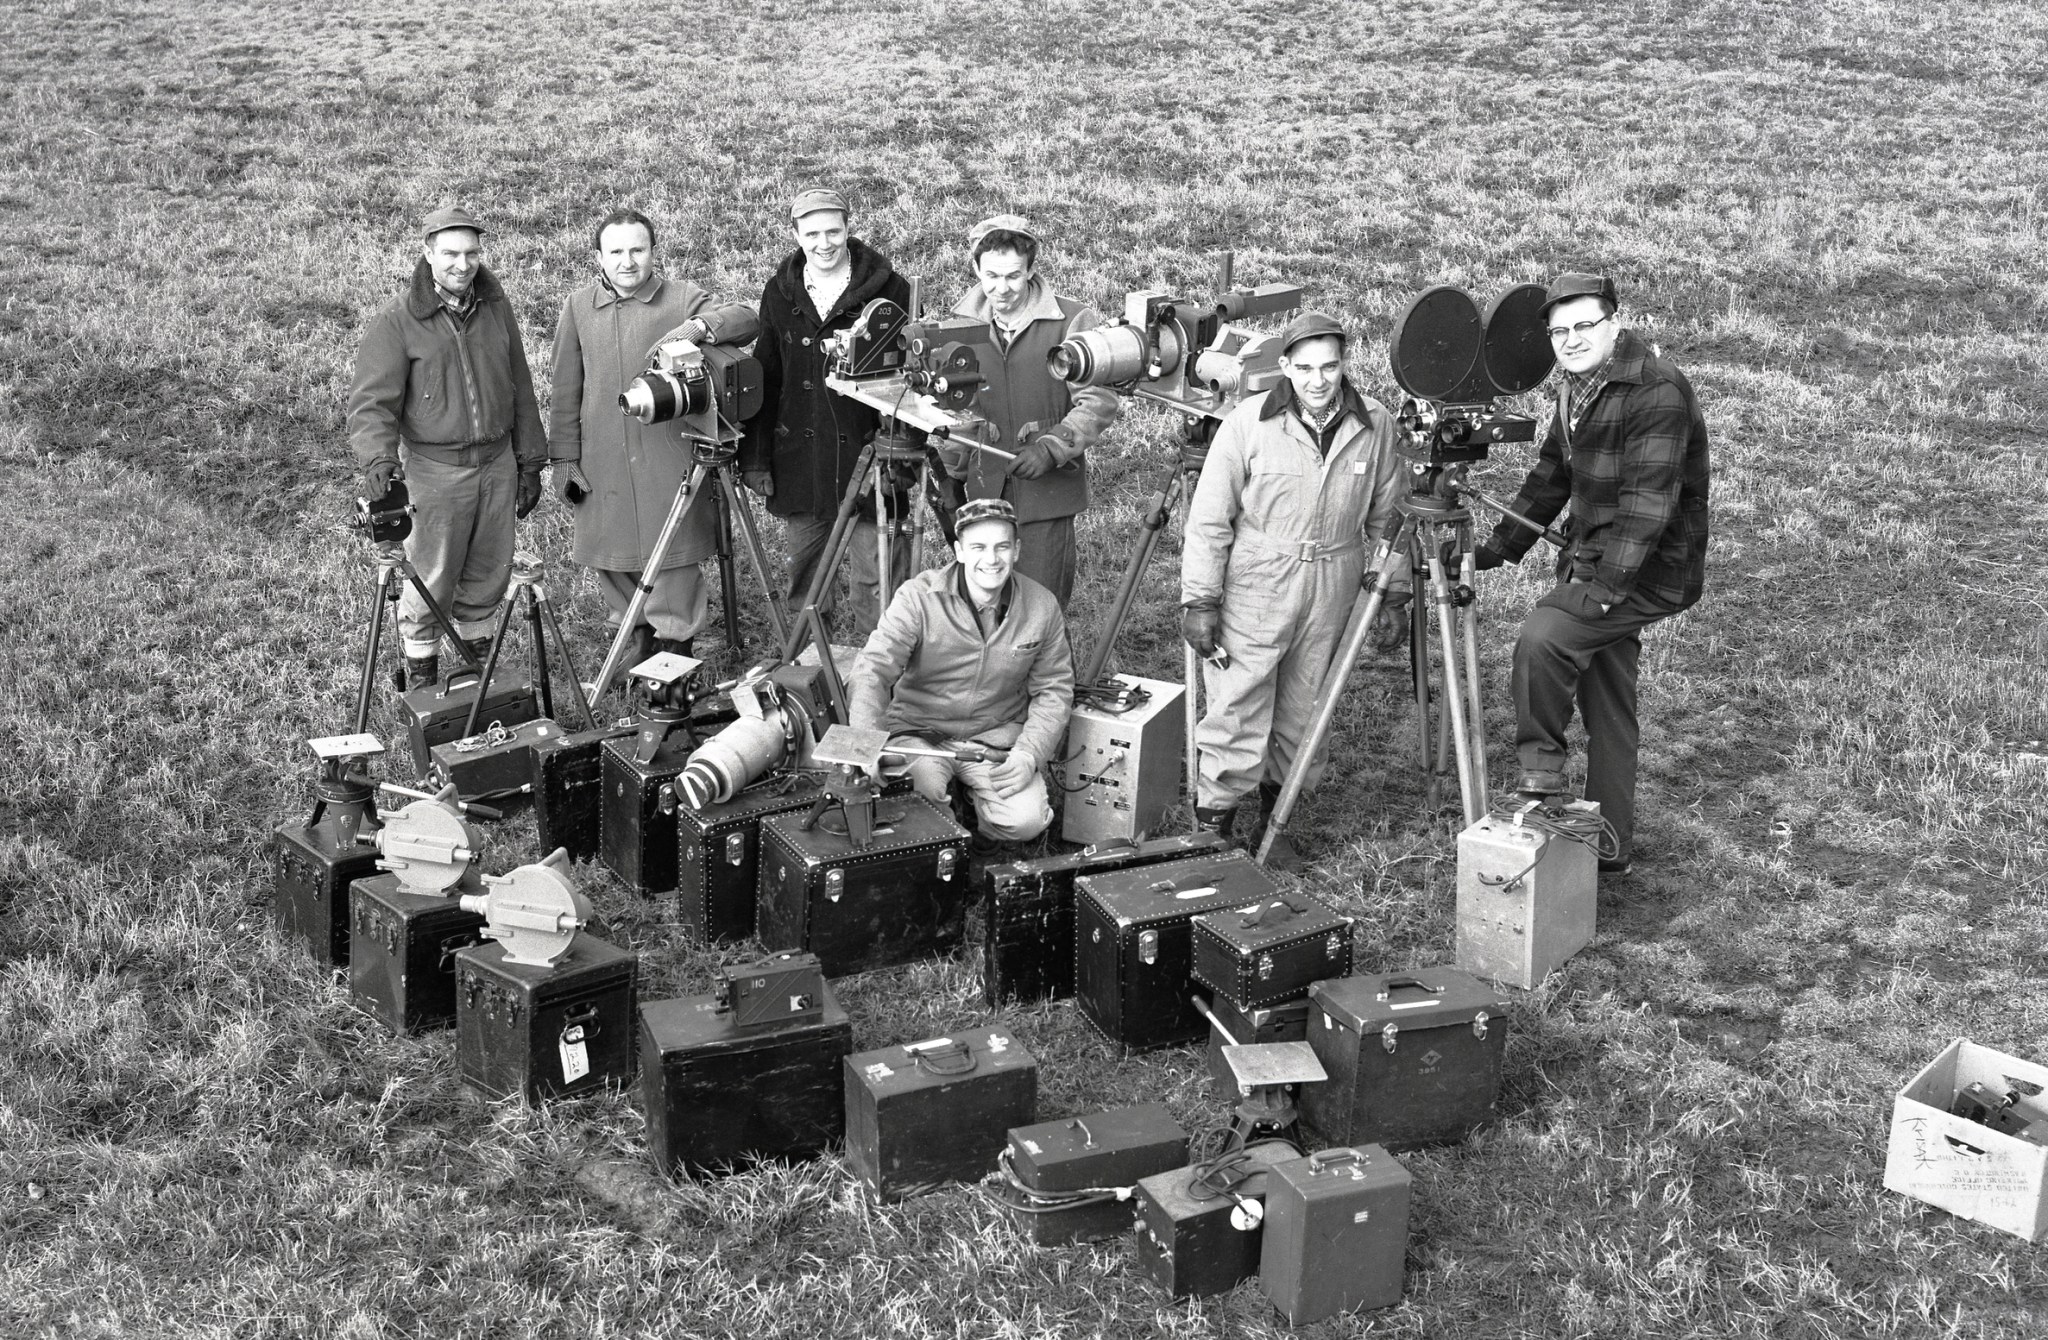 Group of men in field with cameras displayed.